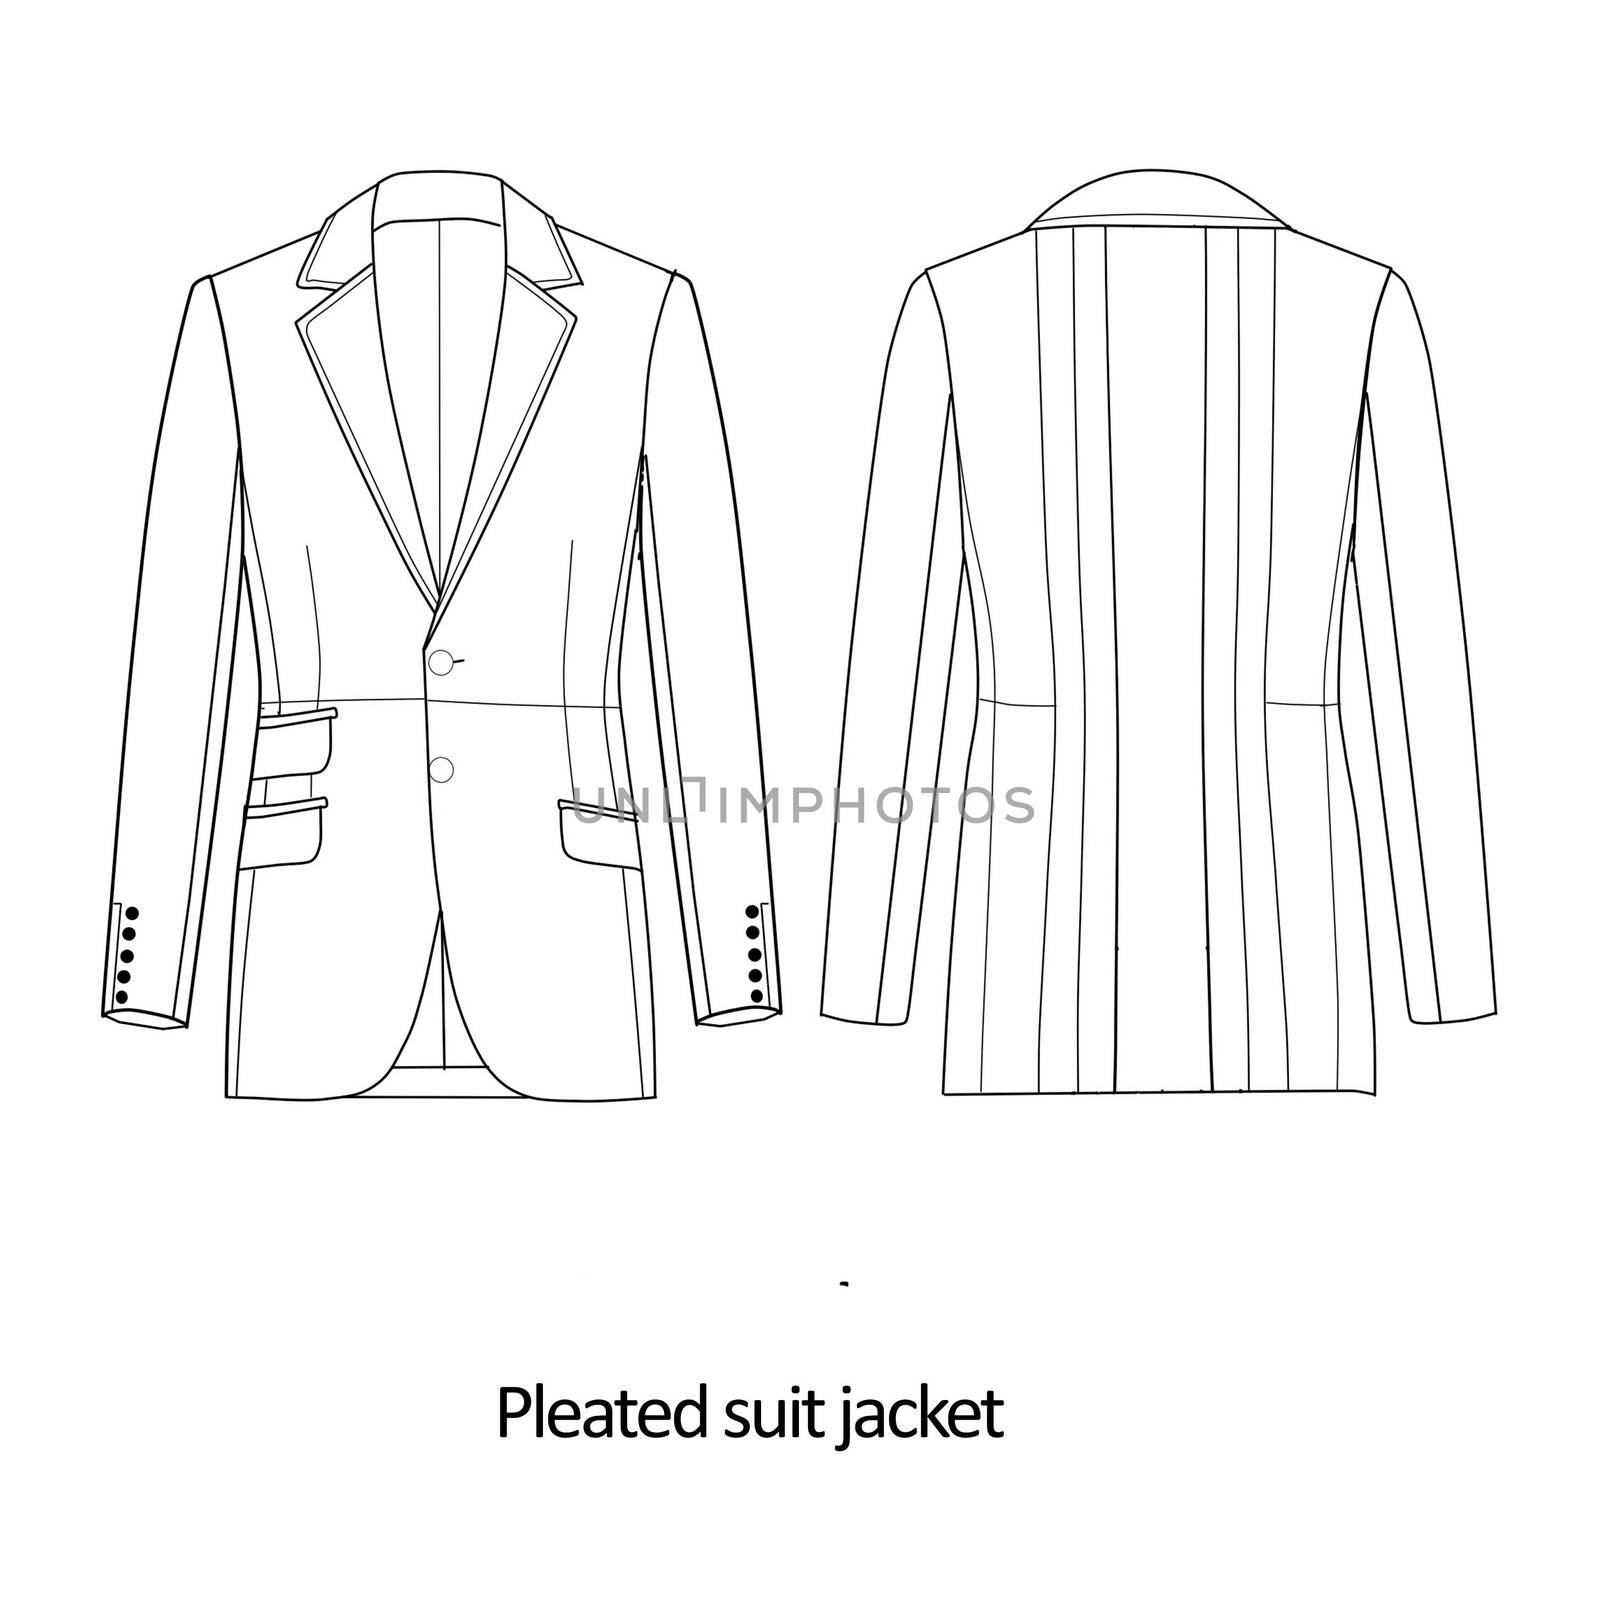 Flat fashion sketch template - Man suit jacket by GGillustrations